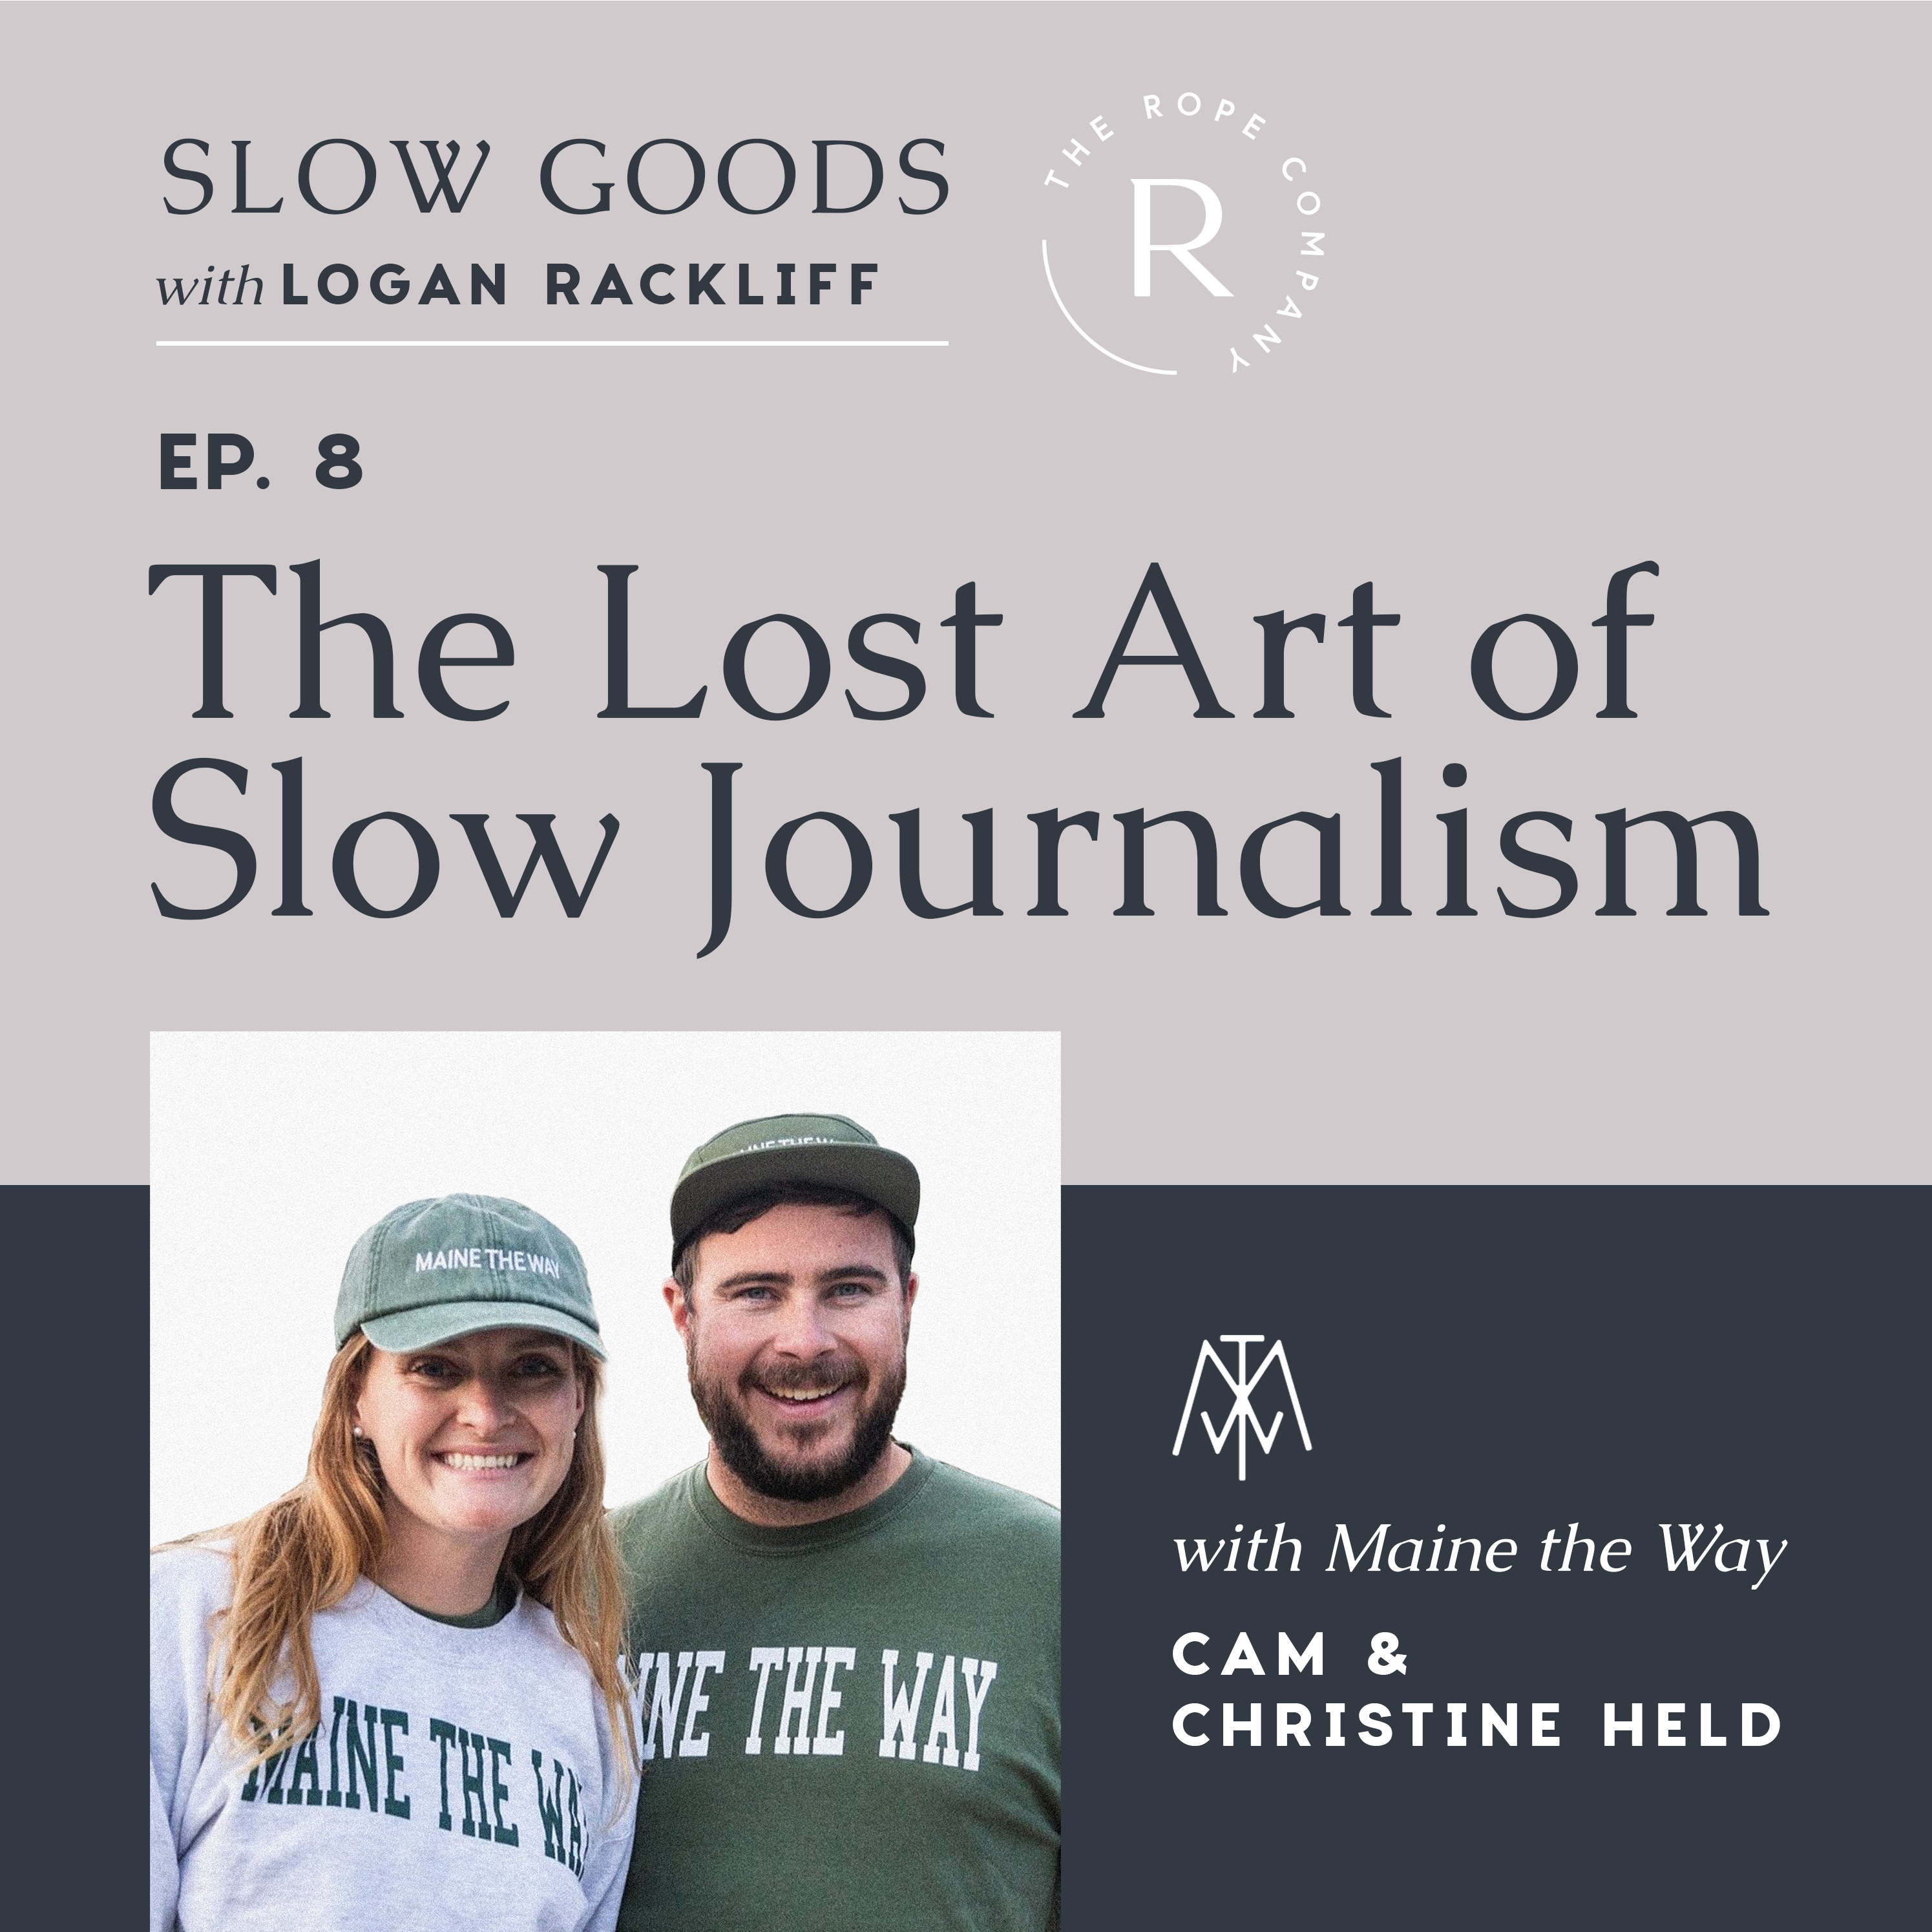 The Lost Art of Slow Journalism | The Slow Goods Podcast | Episode 8